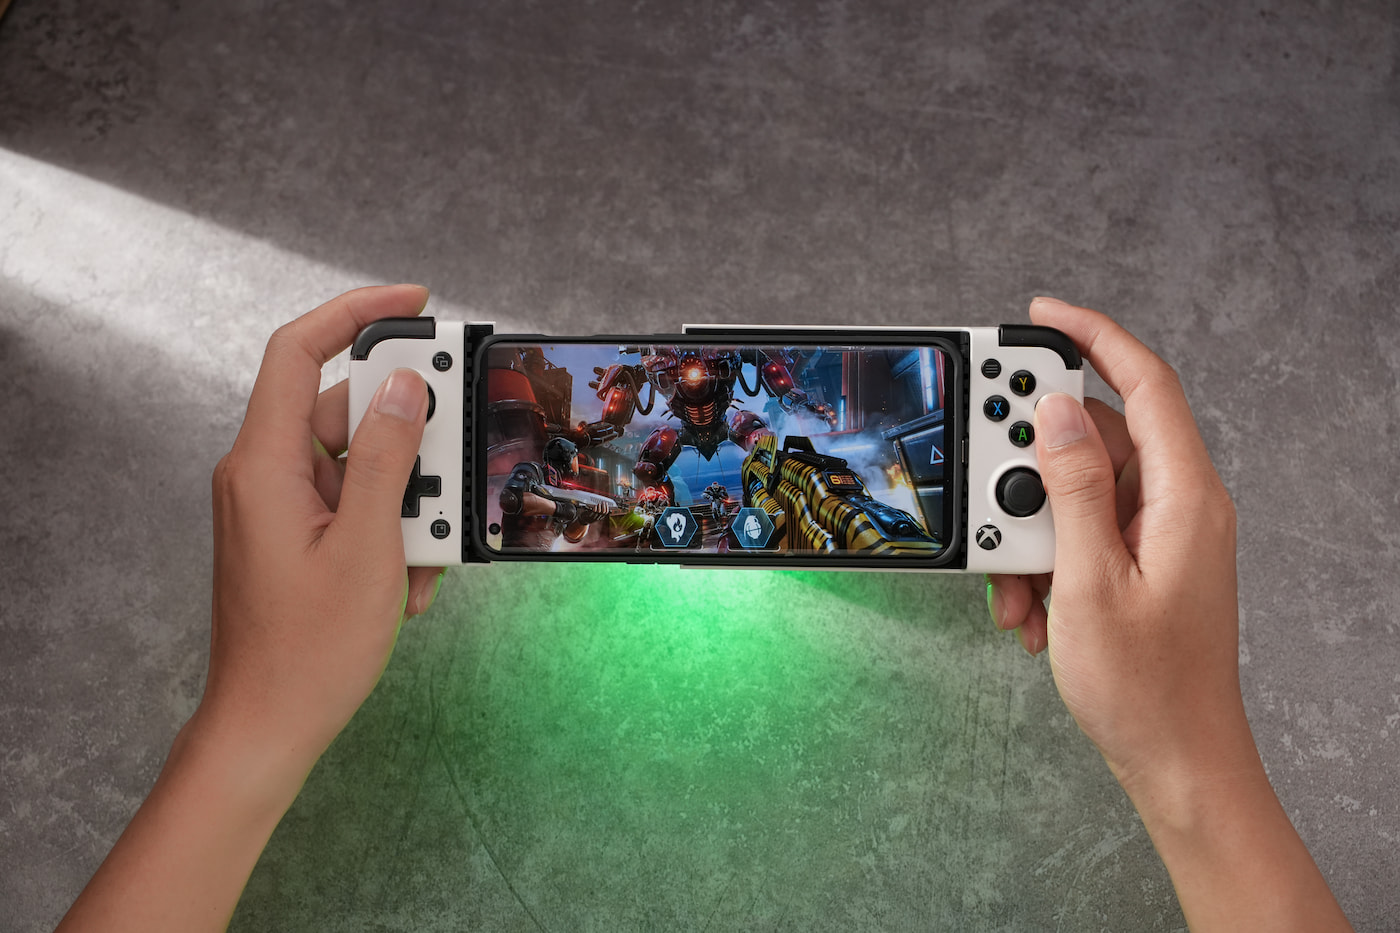 GameSir X2 Pro controller for Android adds full triggers, more